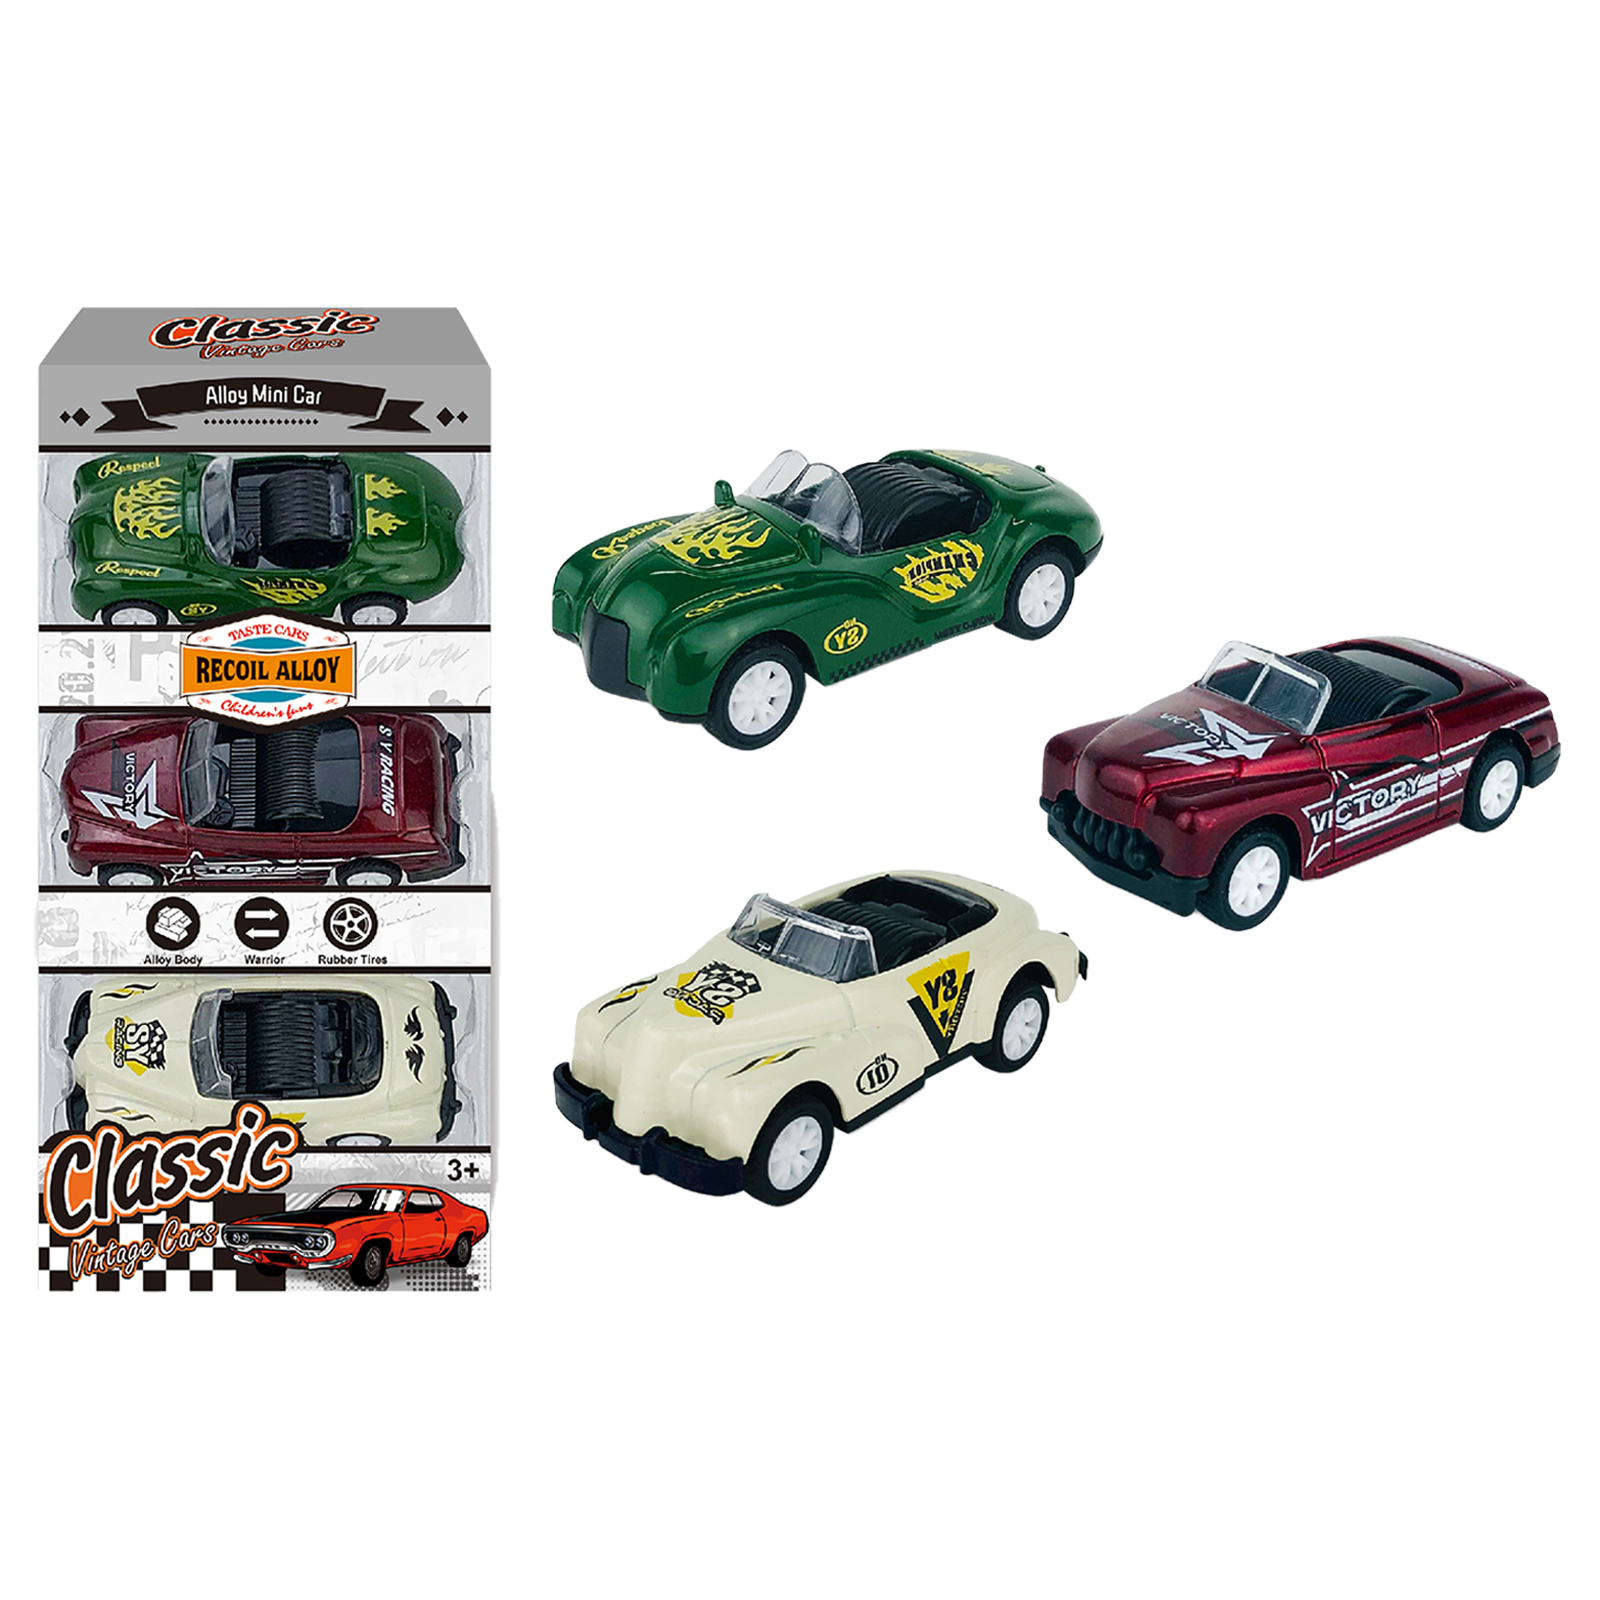 1:64 Alloy Car Model Children Simulation Pull-back Racing Car Toys For Boys Birthday Gifts Collection